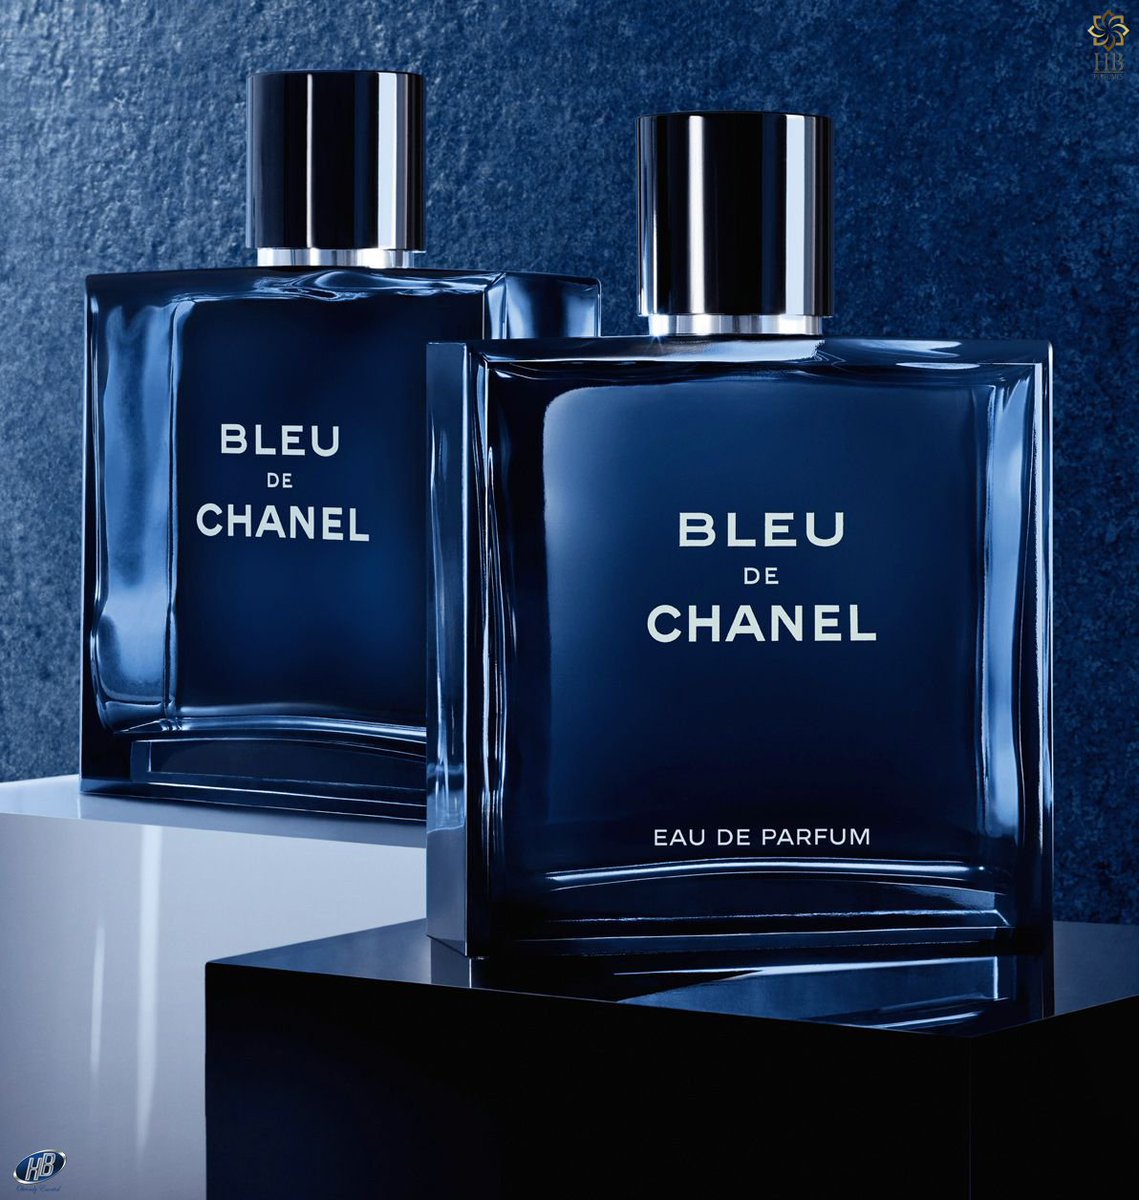 HB Perfumes on X: Bleu de Chanel its available right now on both